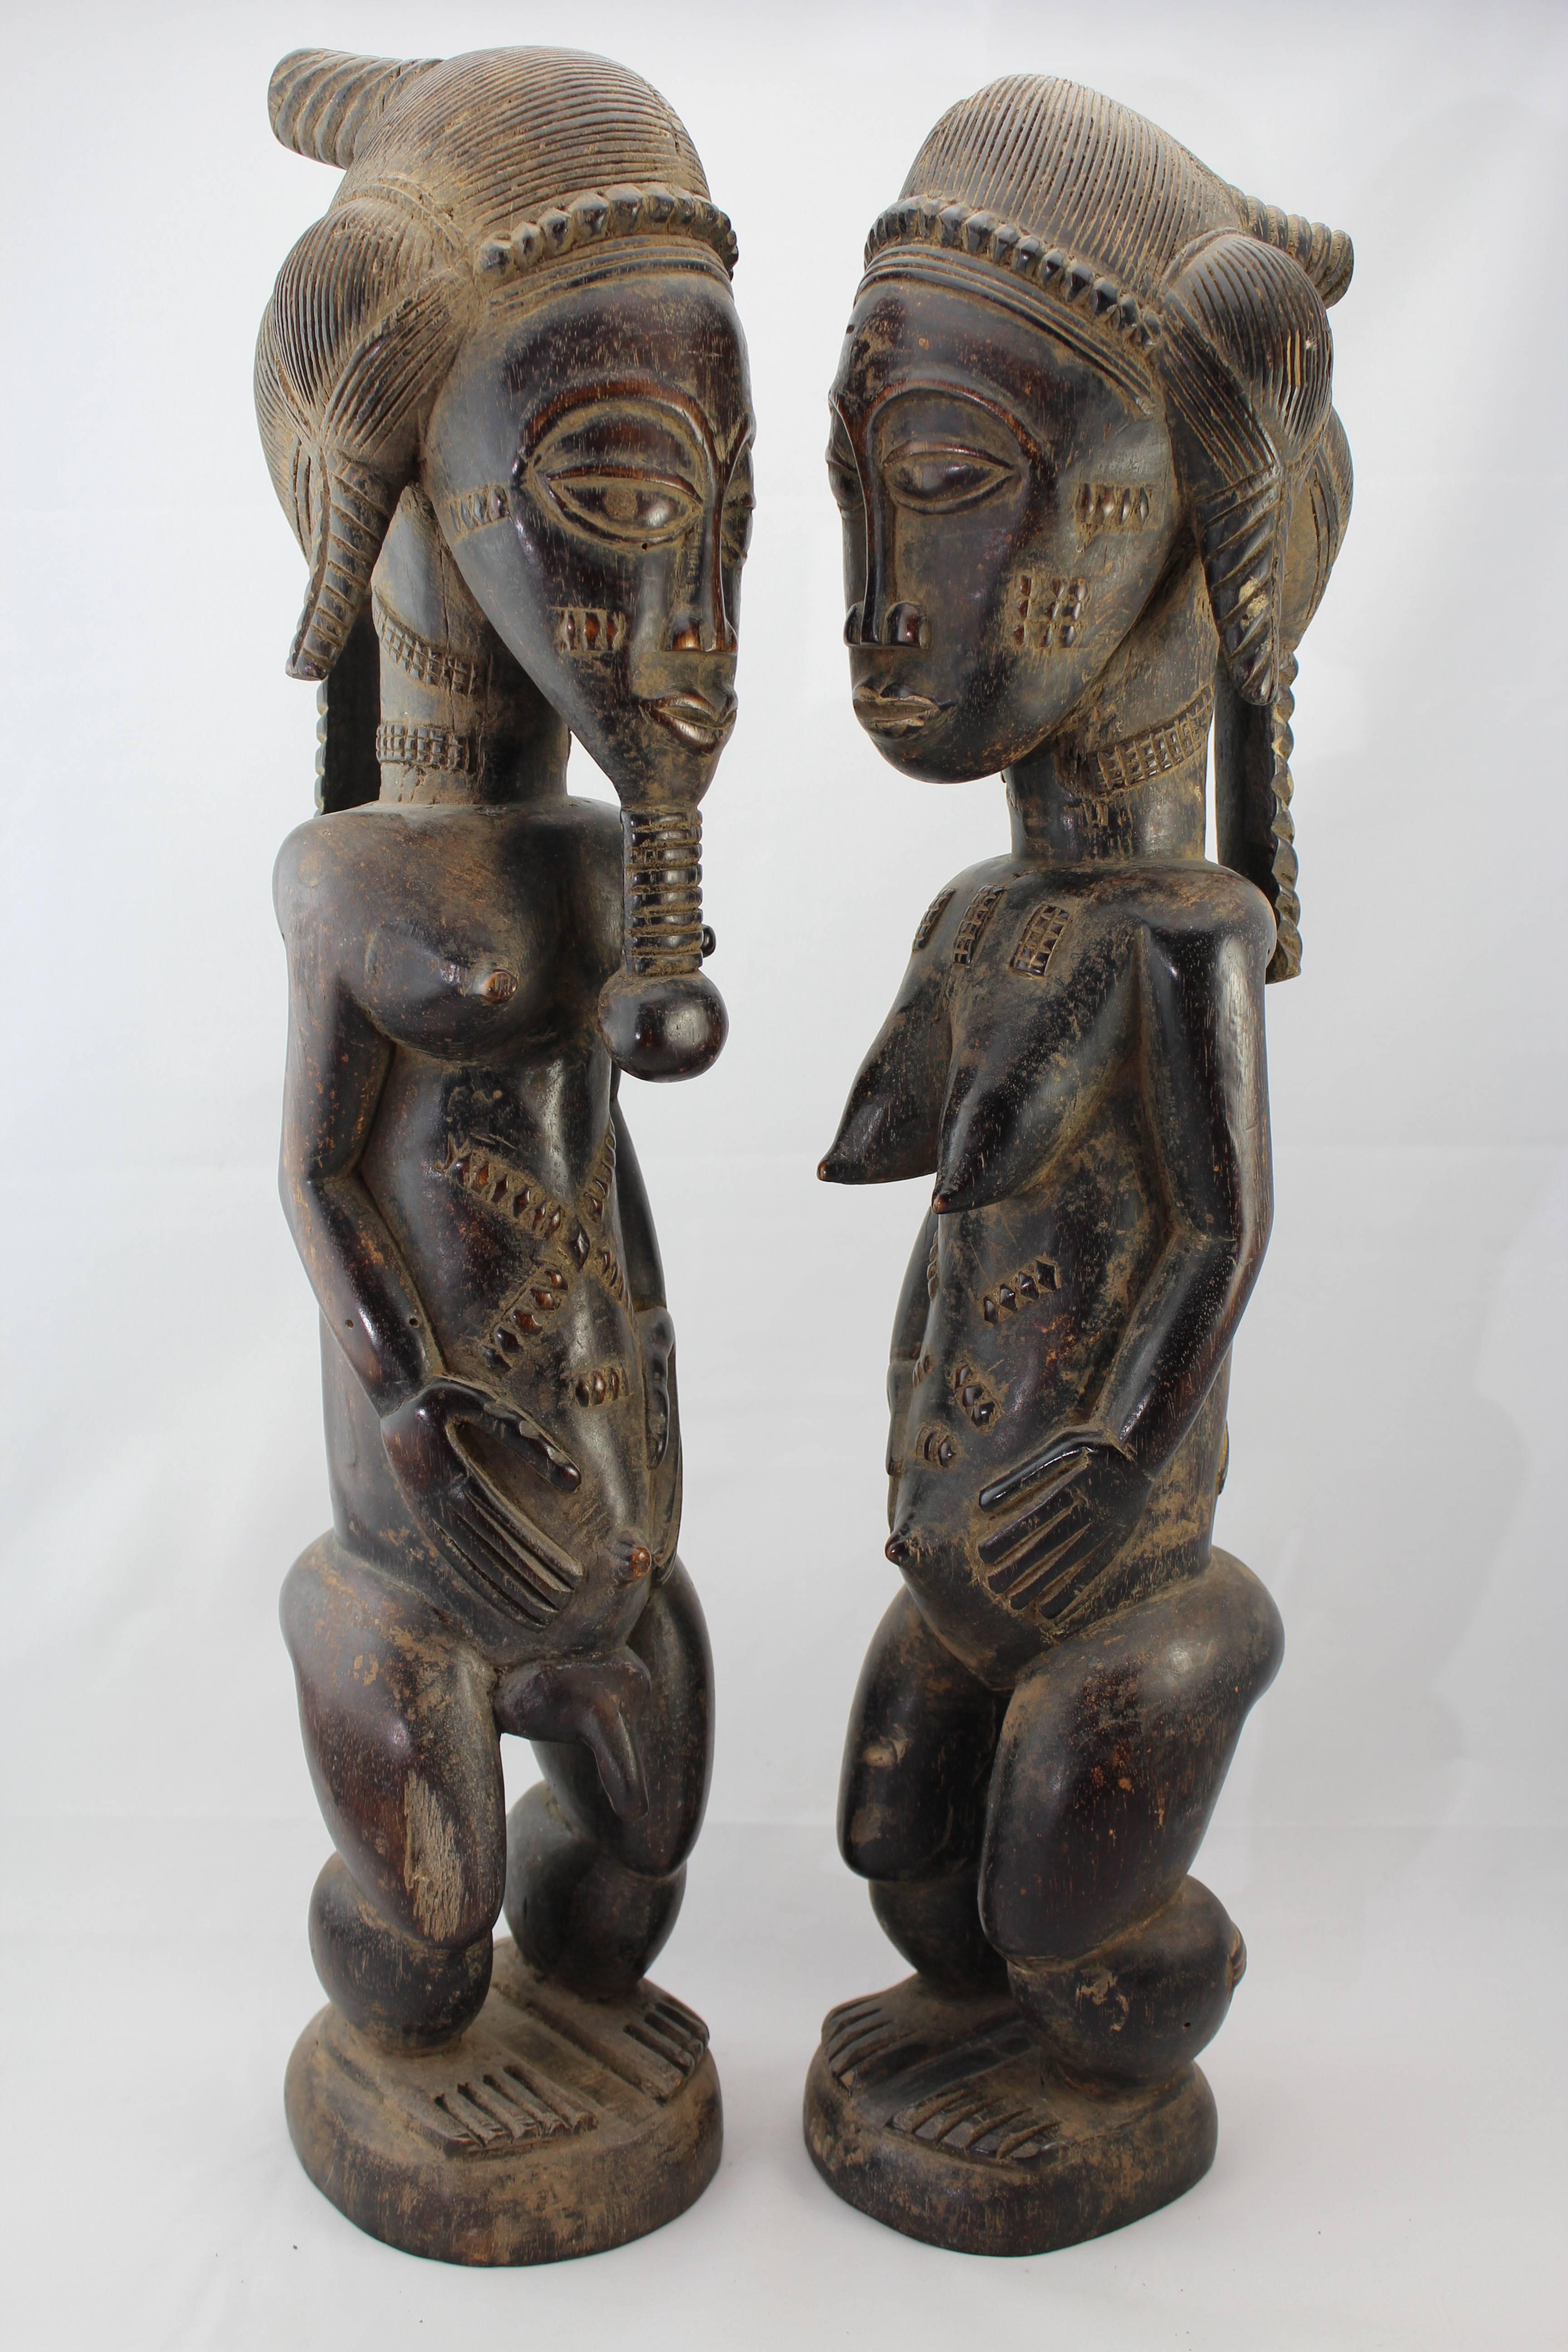 Outsider Art 20th Century or Earlier Large Baule Cote D'Ivoire Male and Female Figures